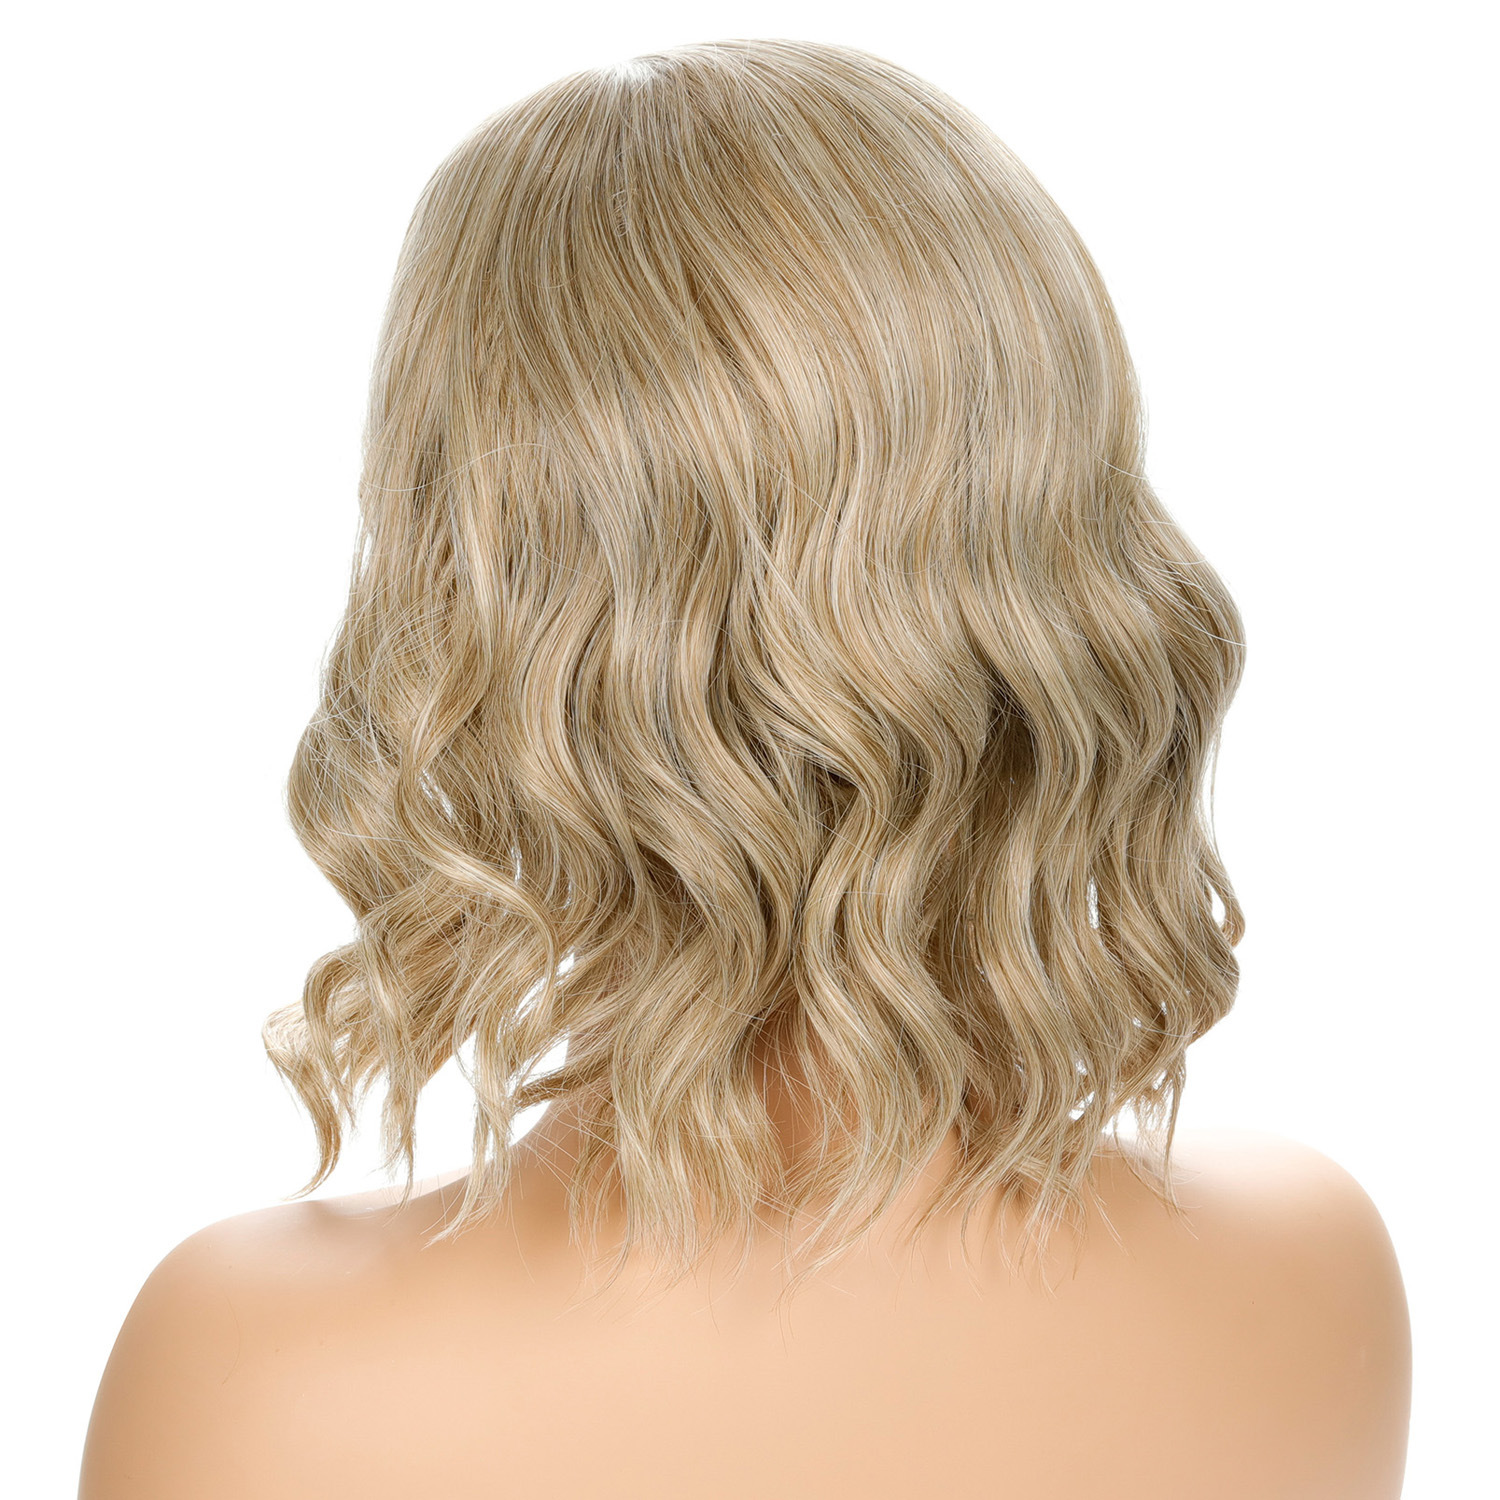 Stylish blonde fashion synthetic wig featuring wavy curly hair and mid-part, designed for women